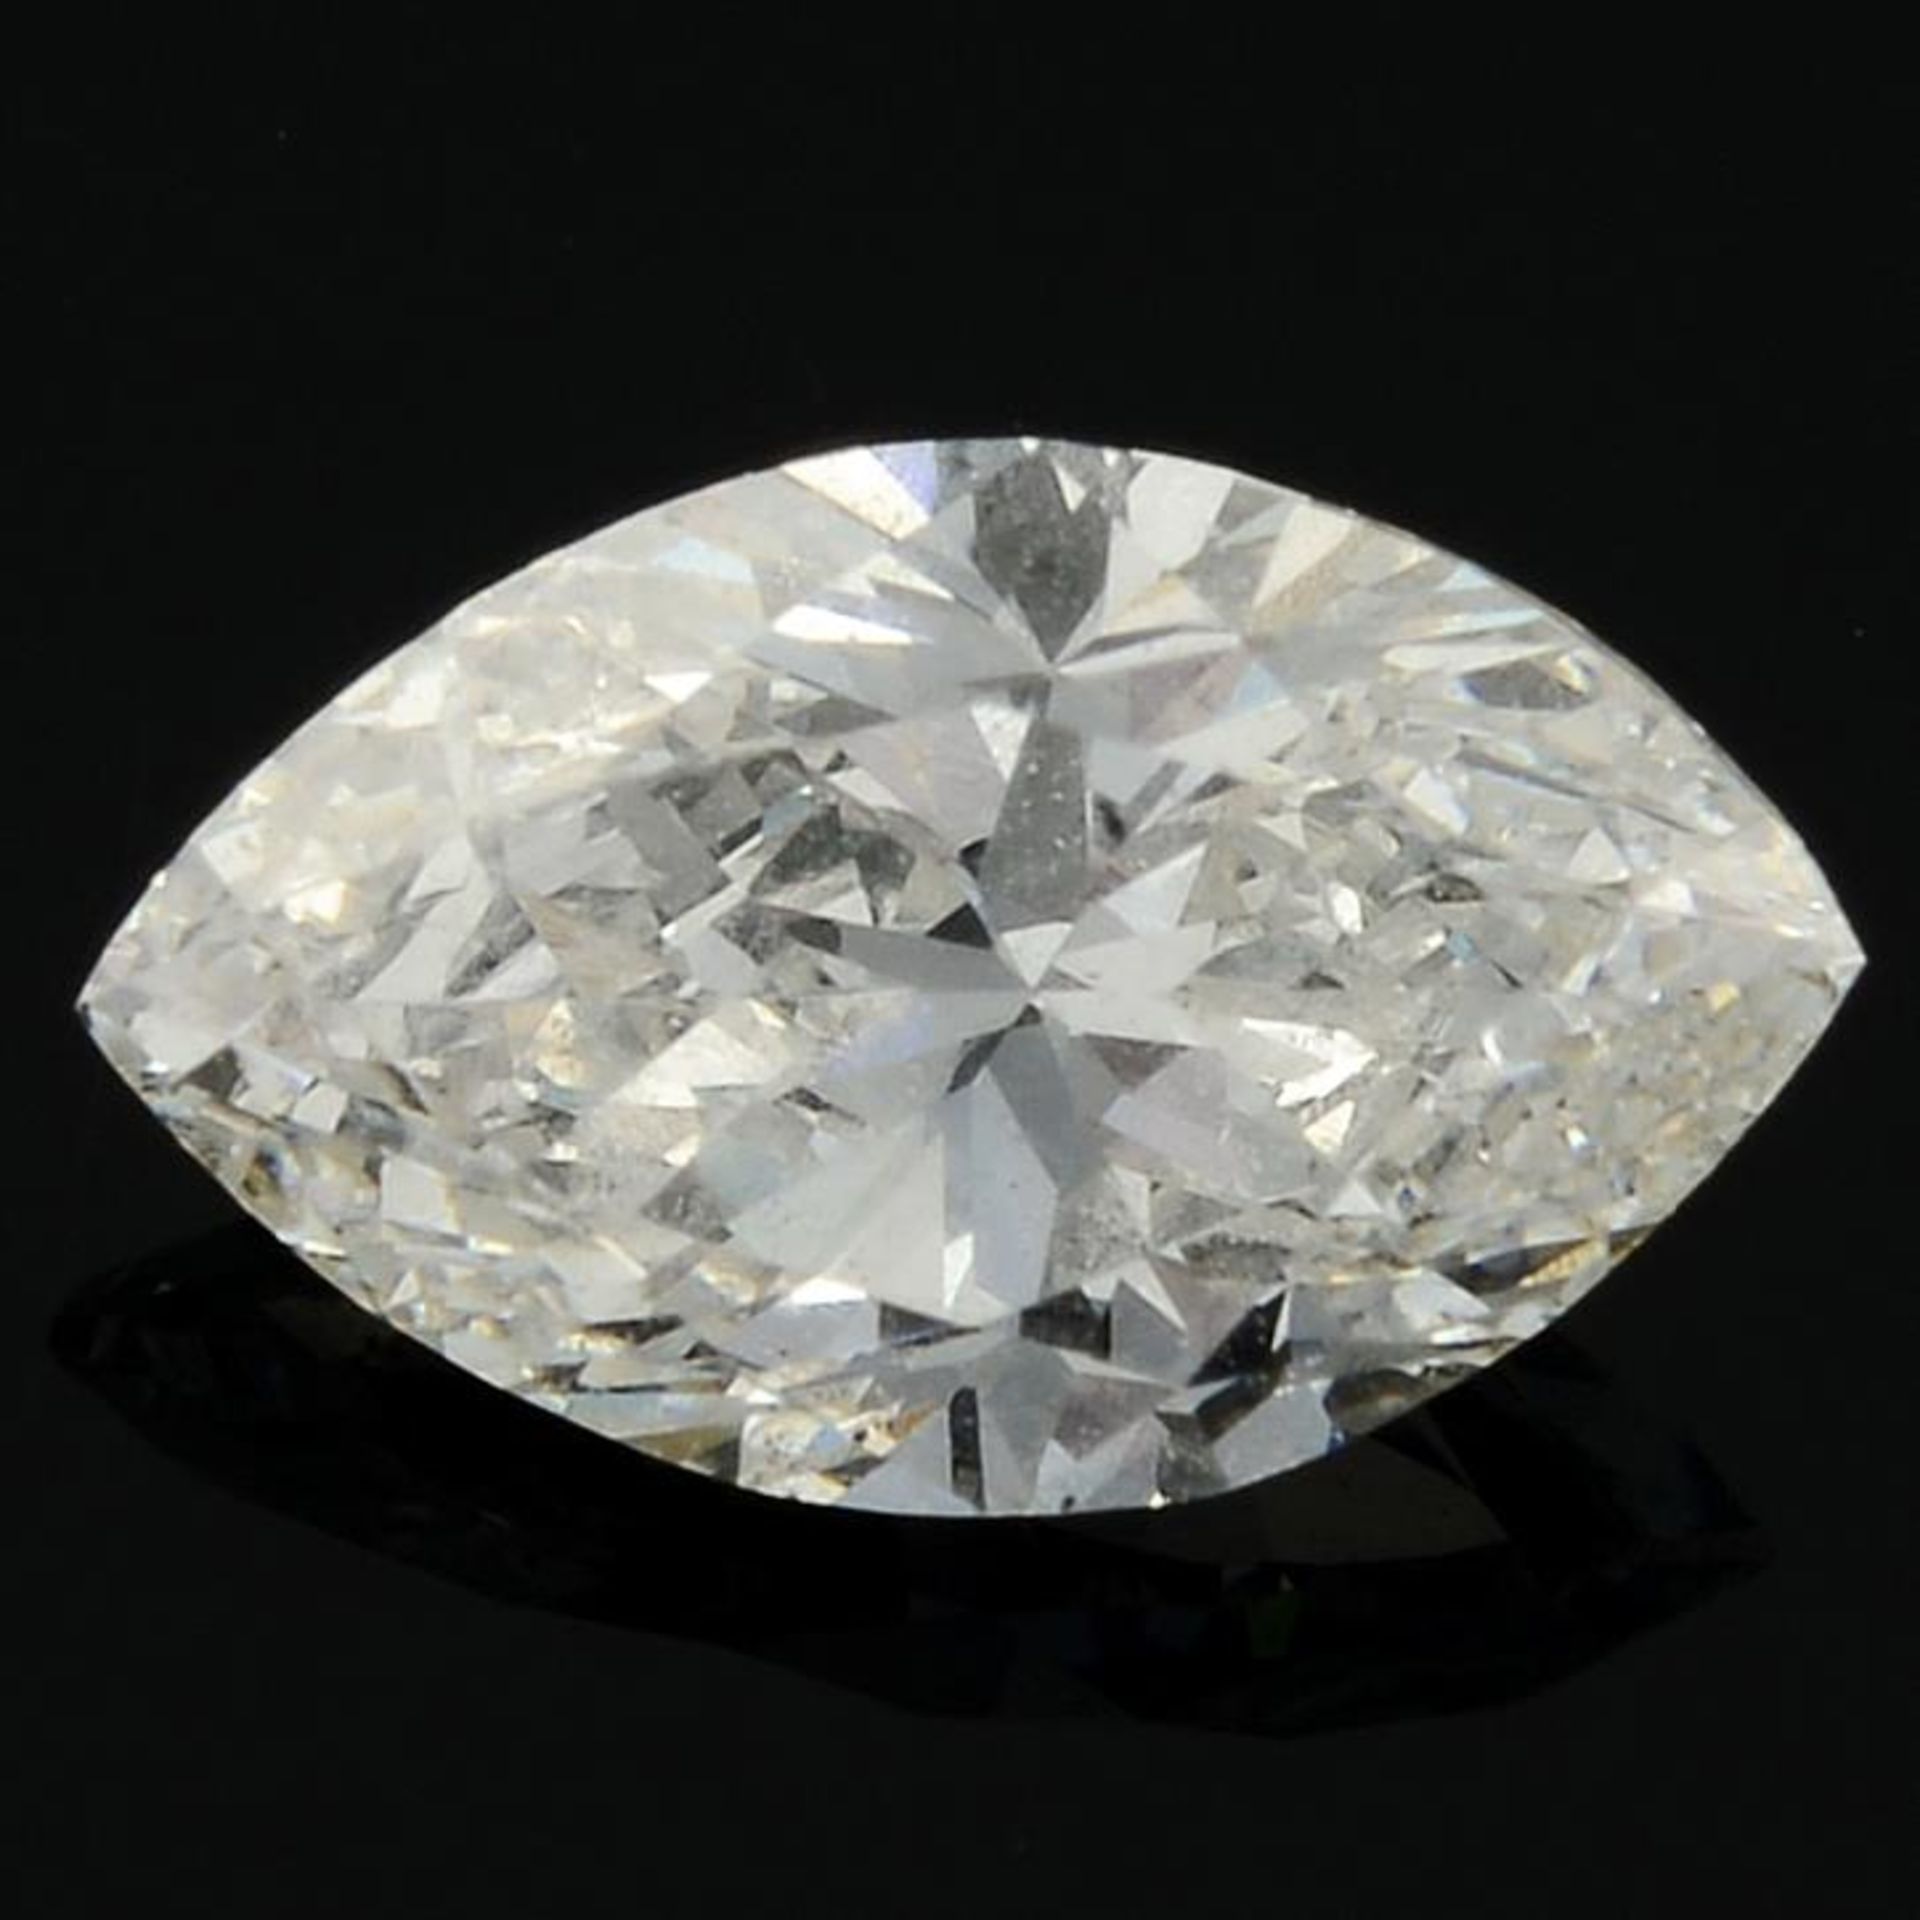 A marquise-shape diamond, weighing 0.49ct.